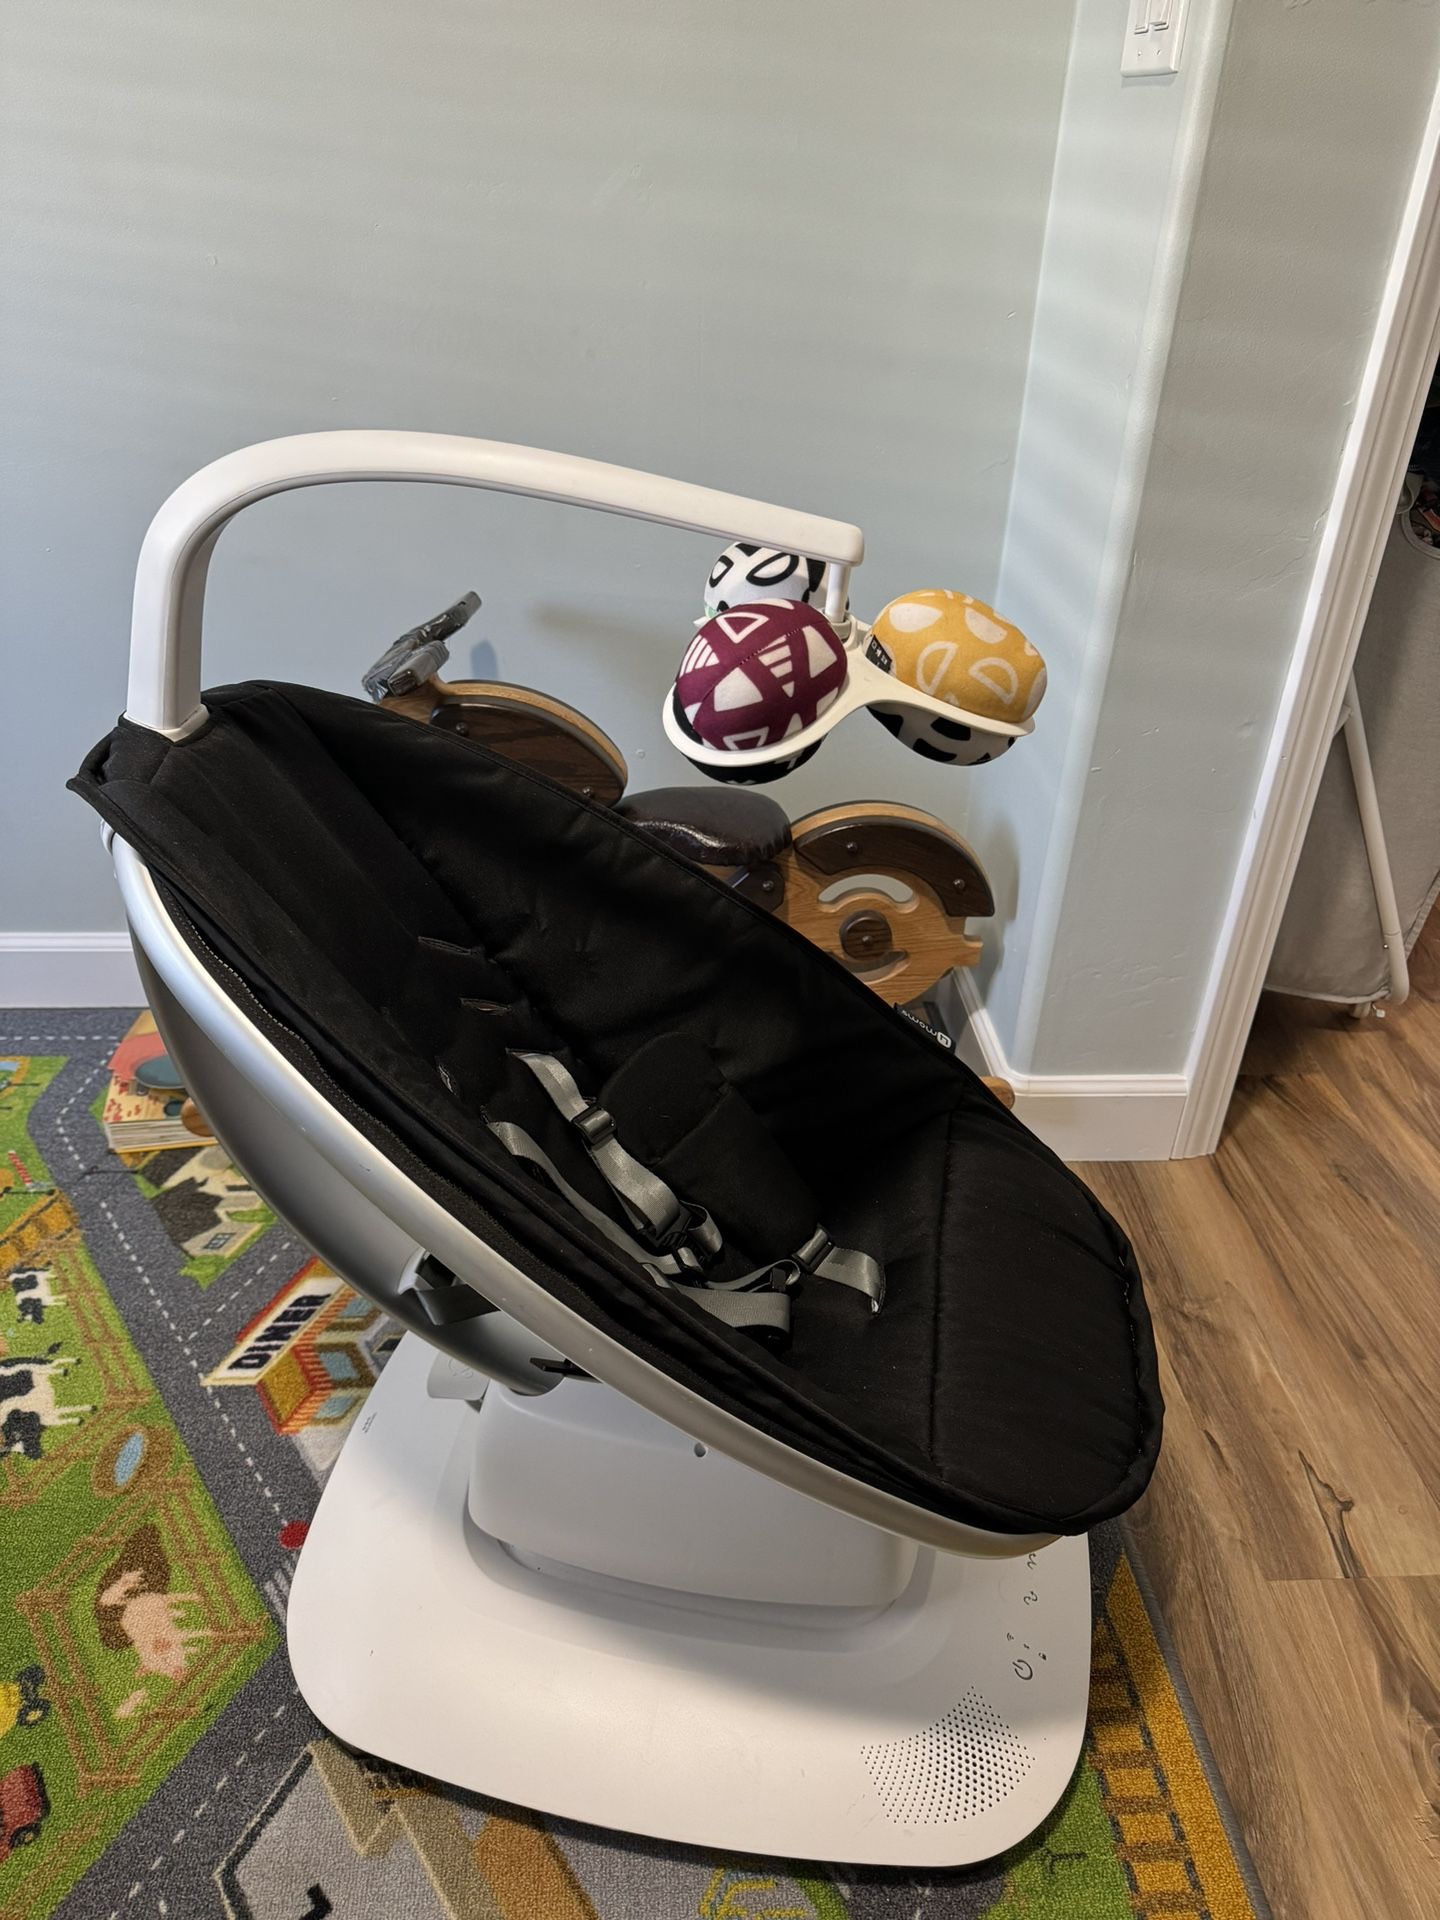 4moms MamaRoo Multi-Motion Baby Swing, Bluetooth Enabled with 5 Unique Motions, Black